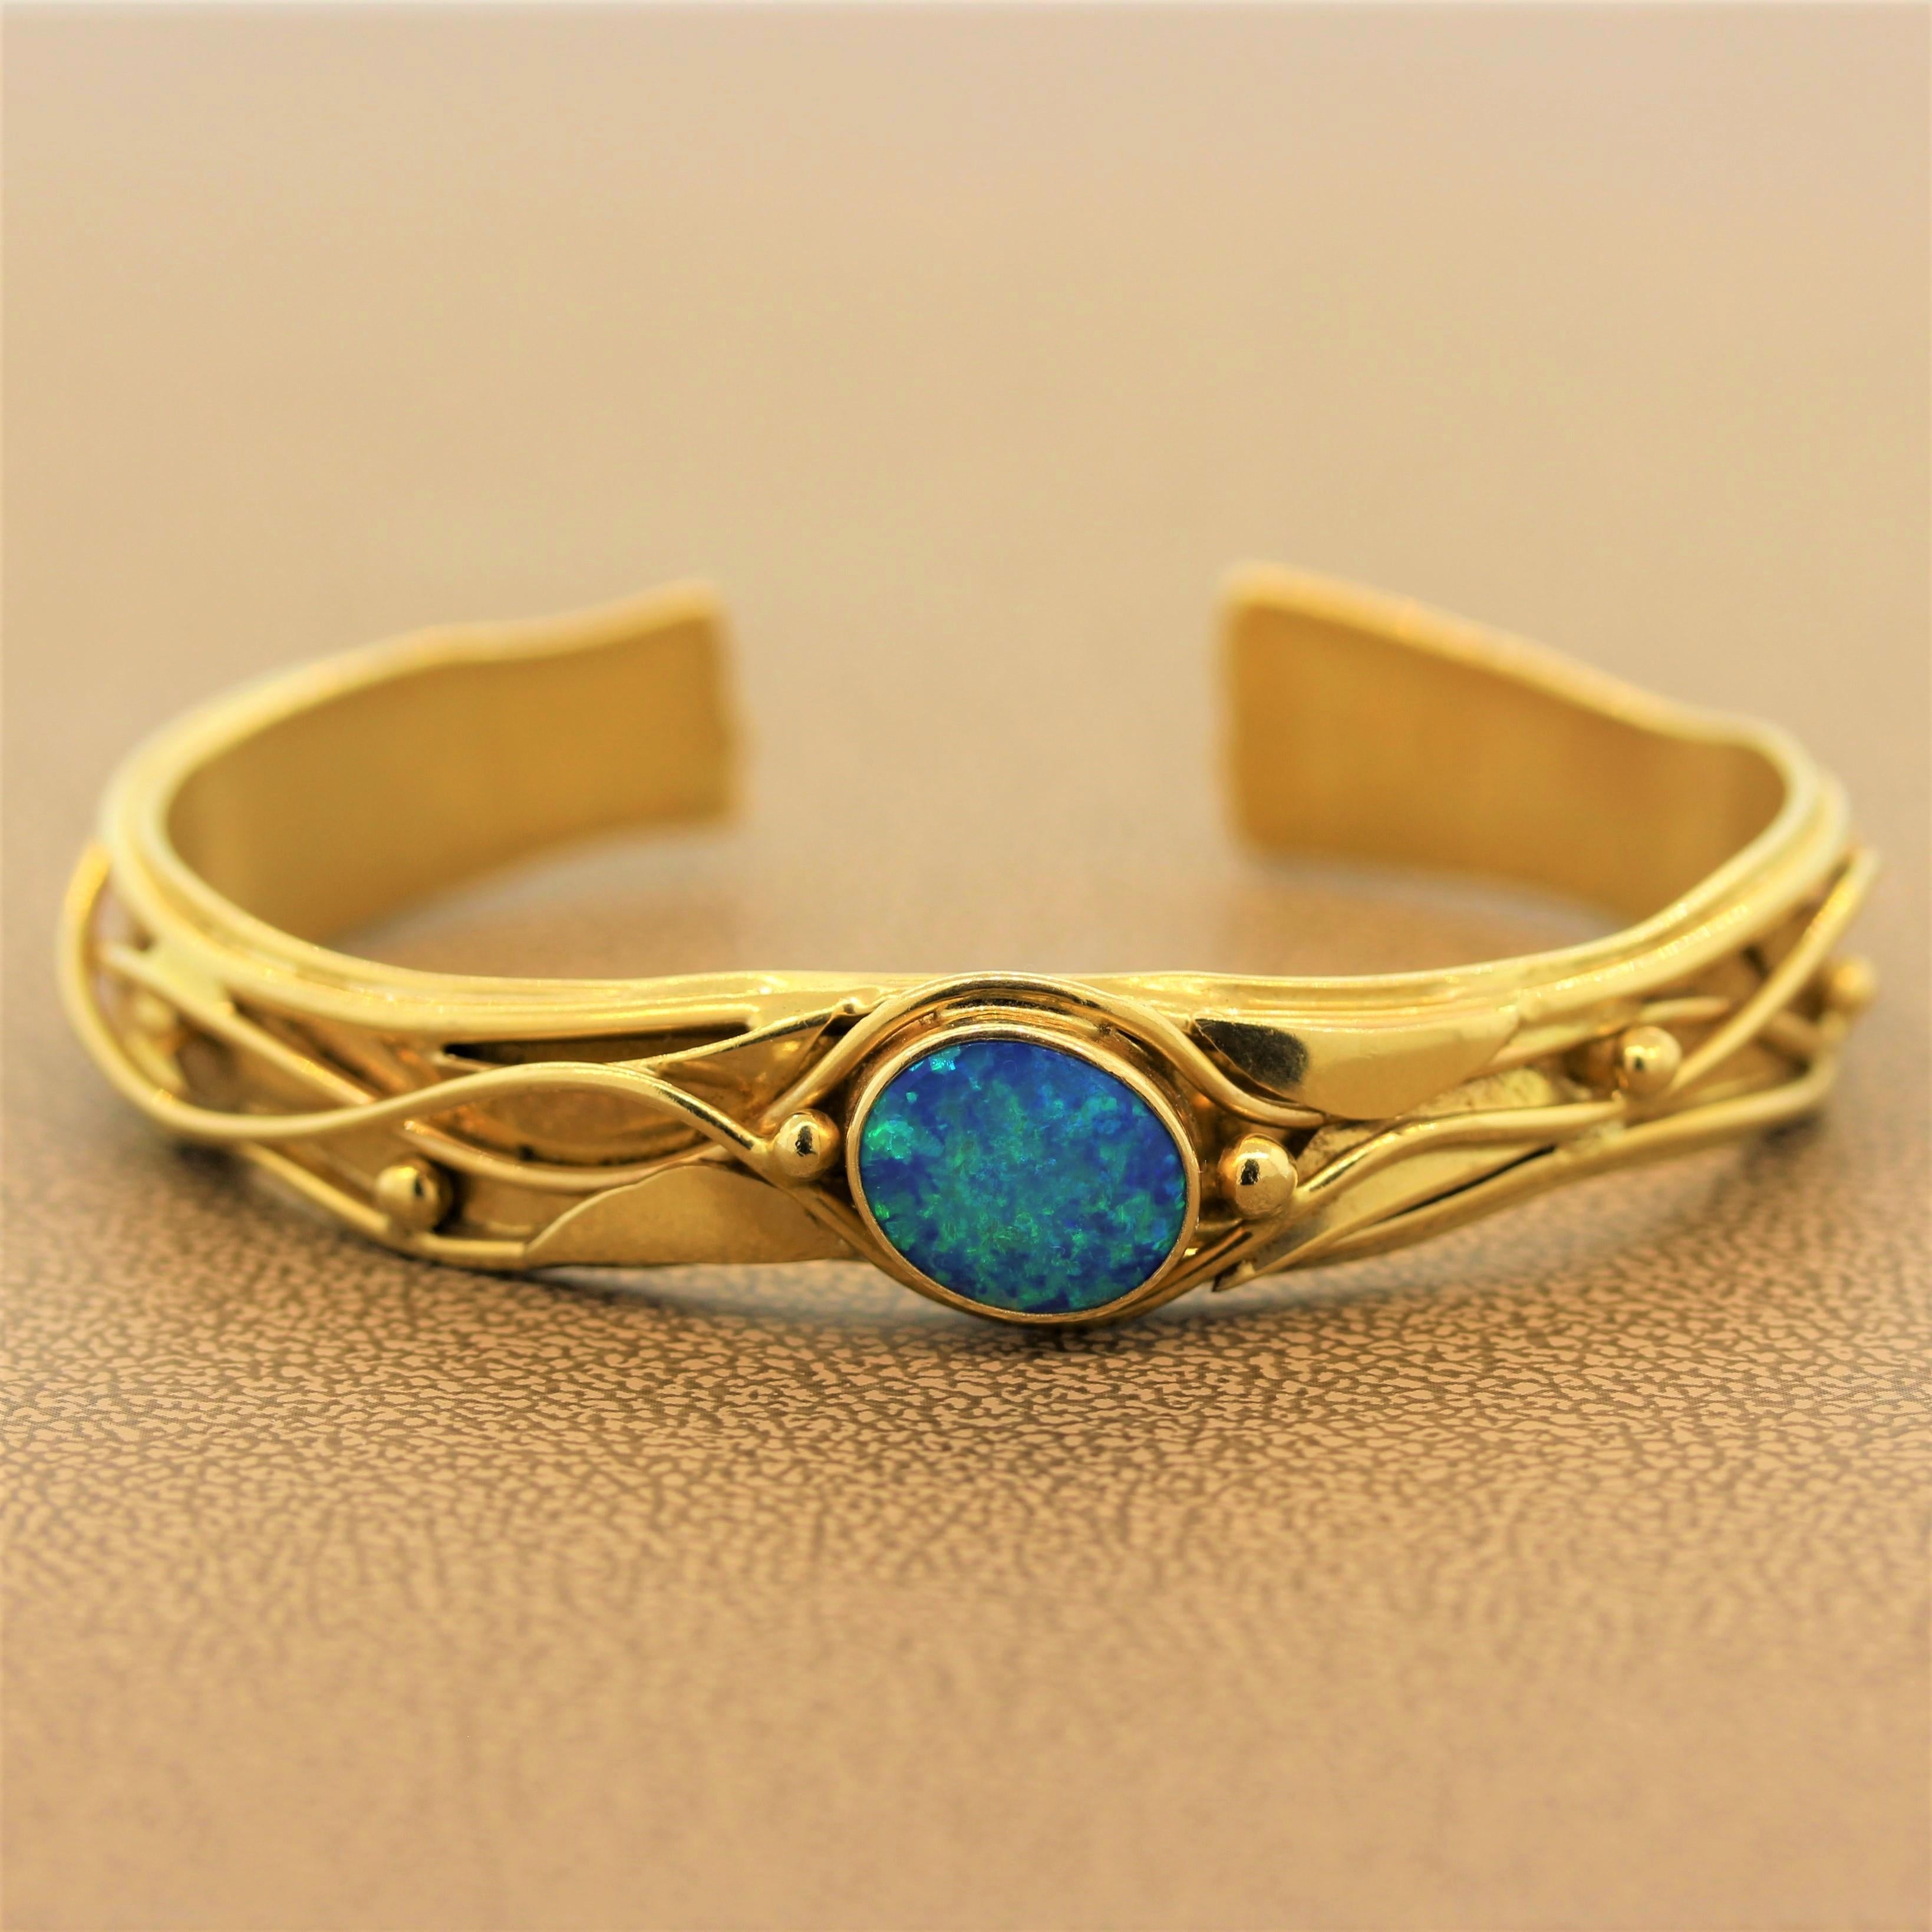 A cuff from designer River featuring a gem Australian opal. The oval shaped opal is bezel set in a 14K yellow gold setting with bead and wavering filigree. The cuff has an opening for easy access for putting on and taking off.  

Cuff Circumference: